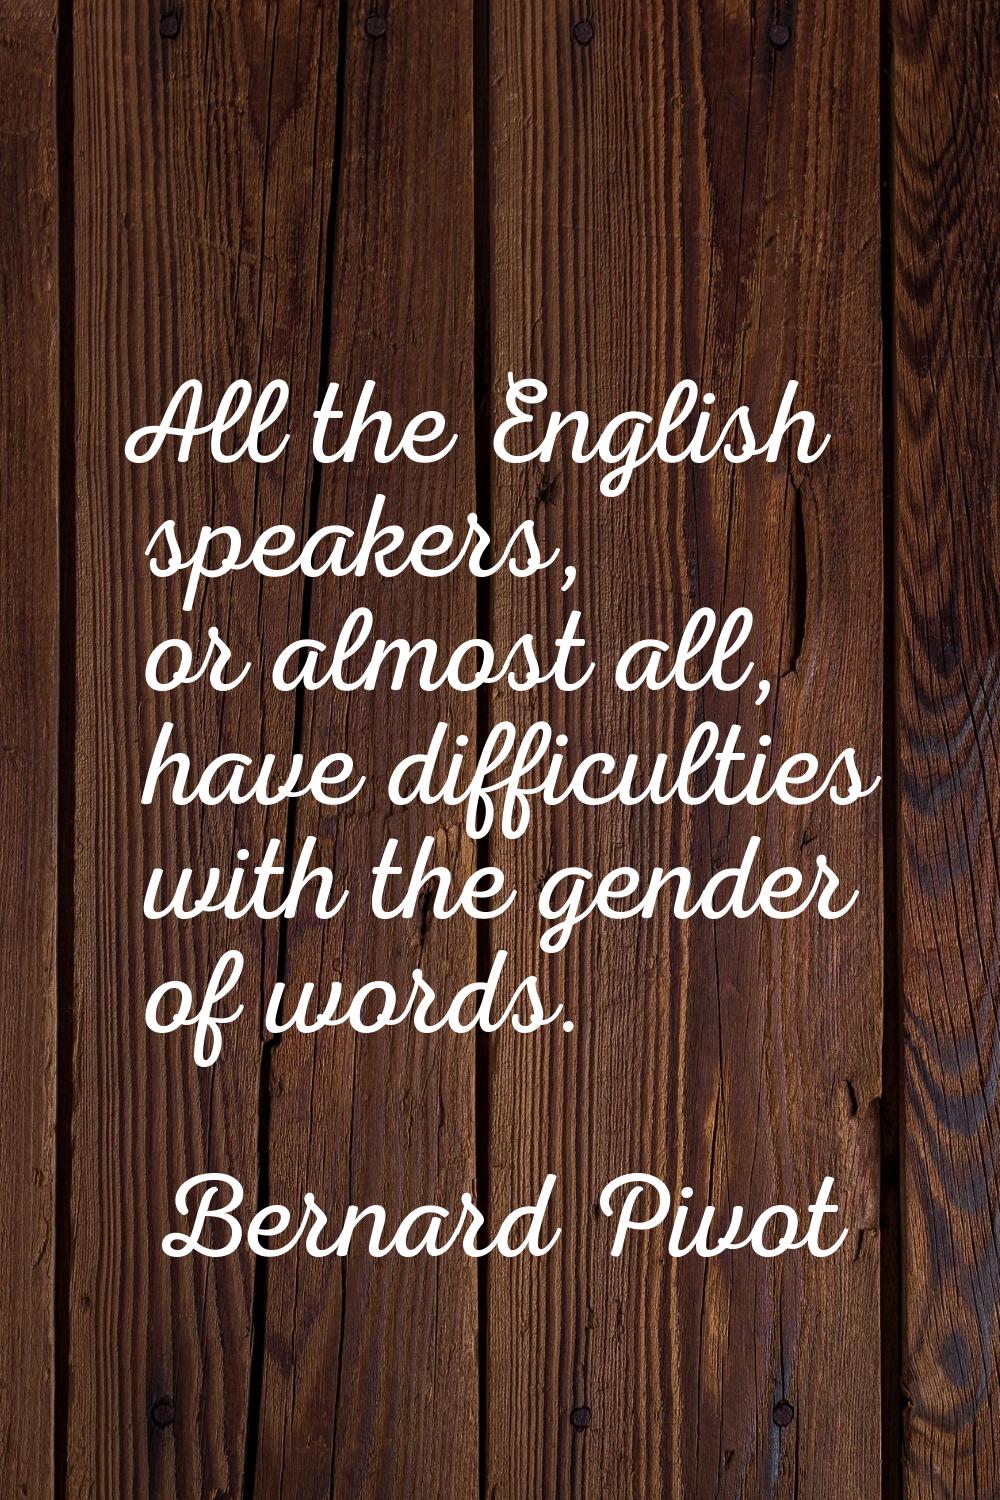 All the English speakers, or almost all, have difficulties with the gender of words.